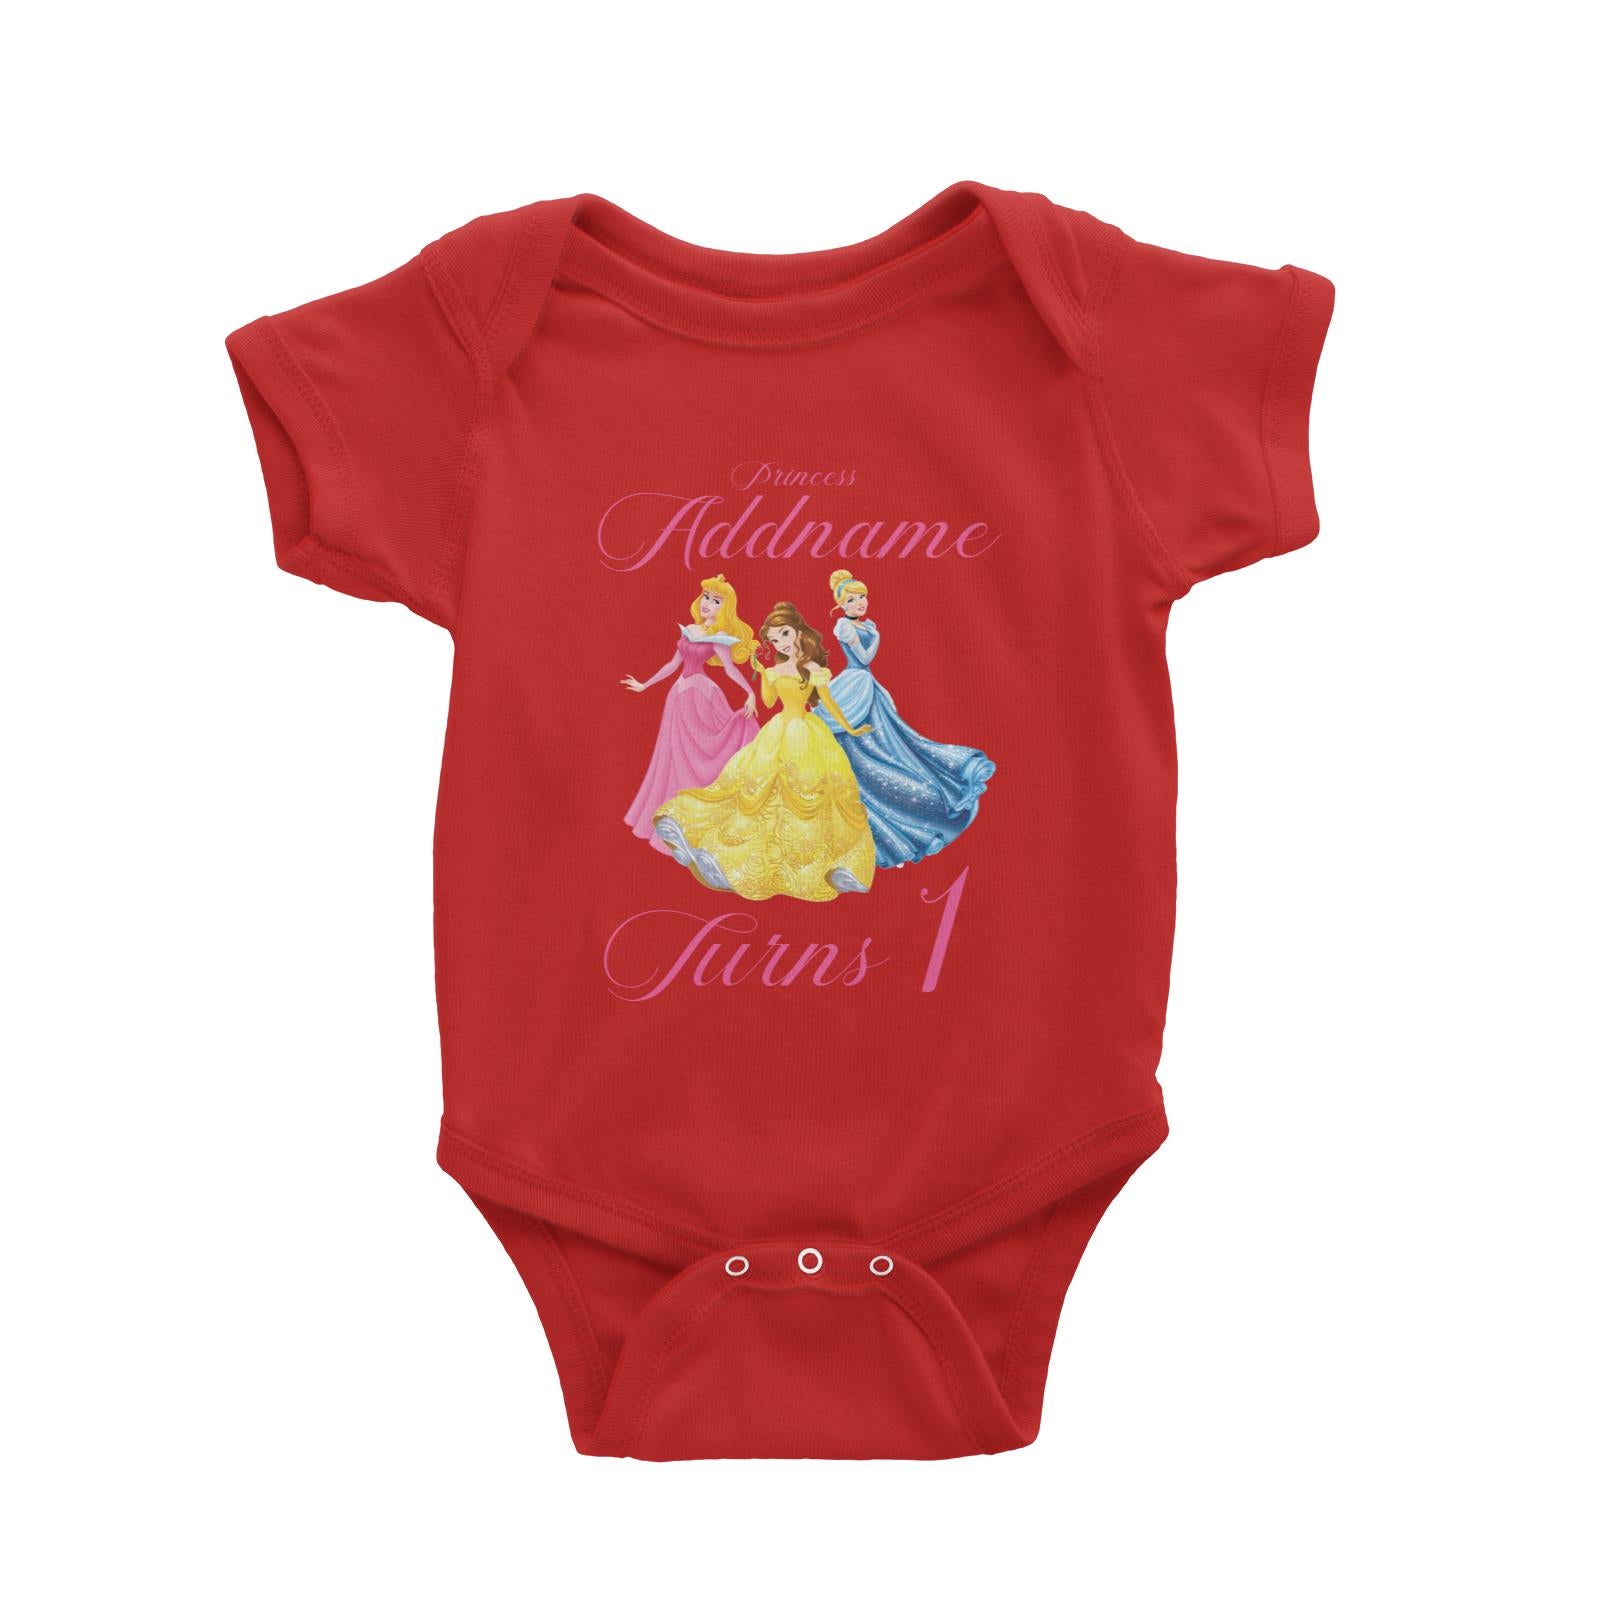 Princess Addname Birthday Theme Personalizable with Name and Number Baby Romper